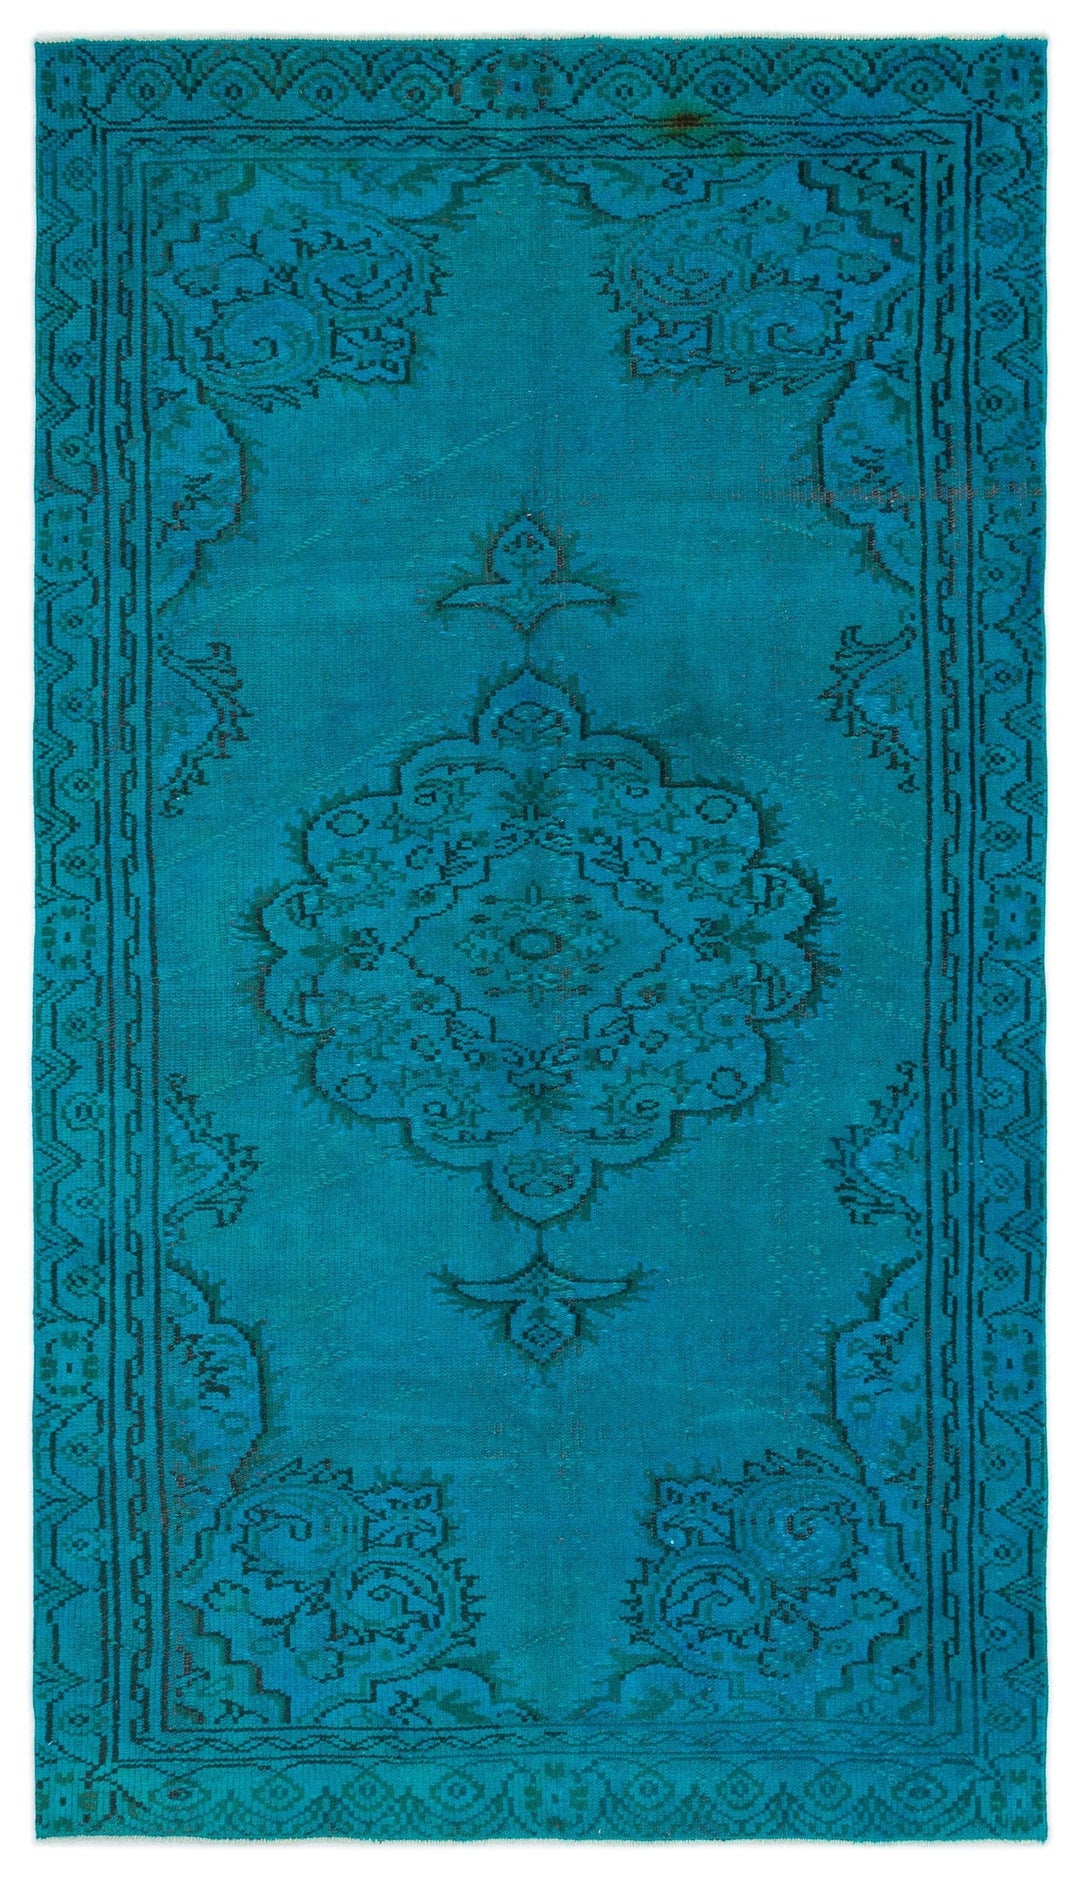 Athens Turquoise Tumbled Wool Hand Woven Carpet 152 x 270